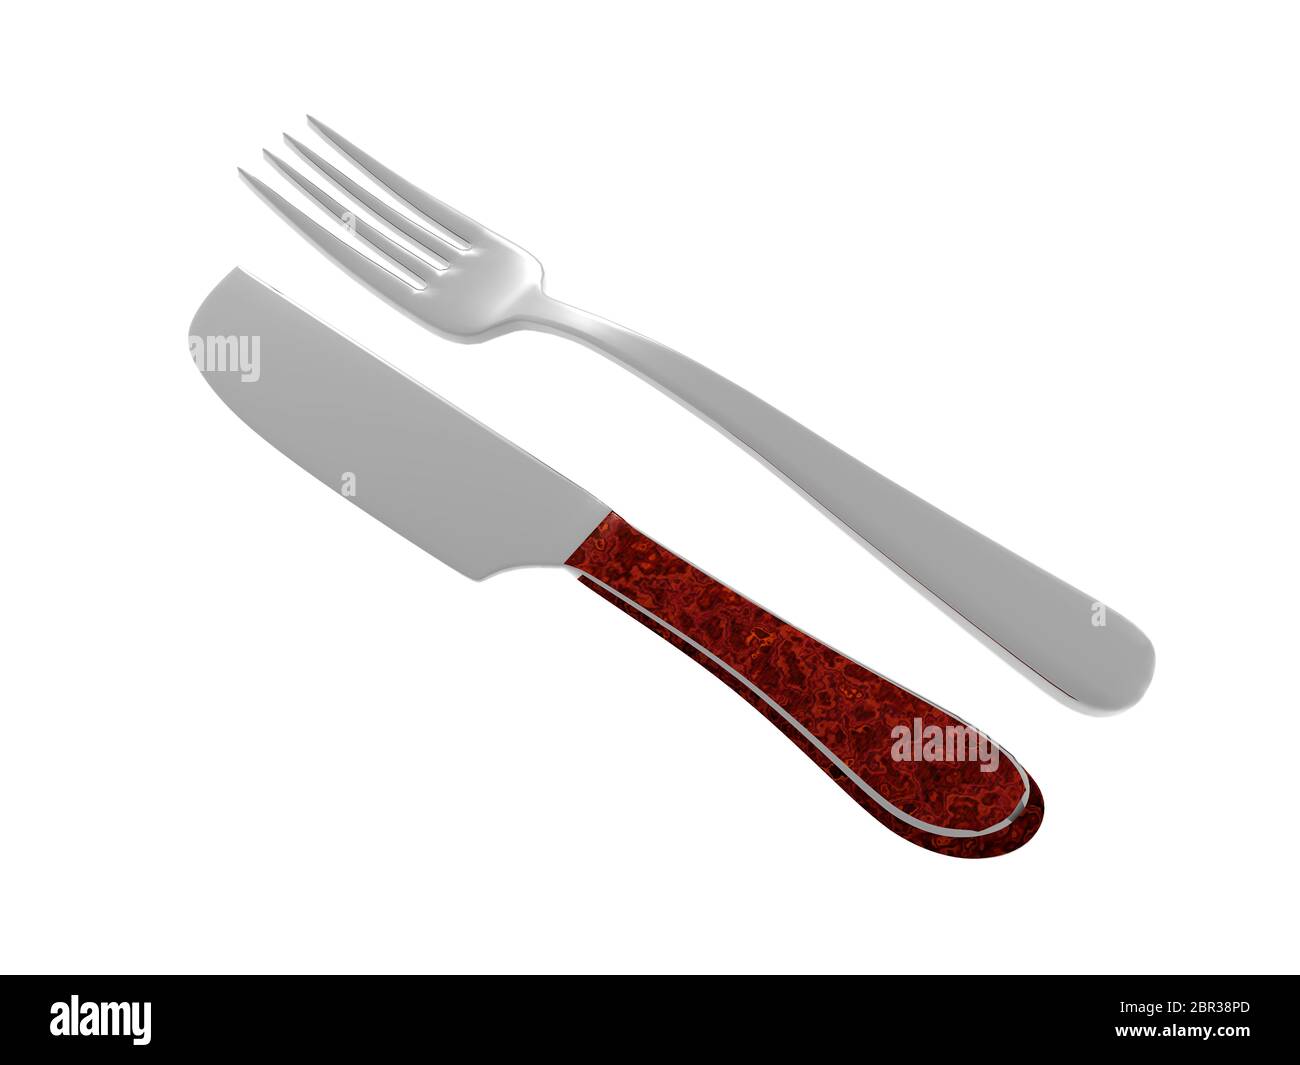 Cutlery from knife and fork 3D rendering Stock Photo